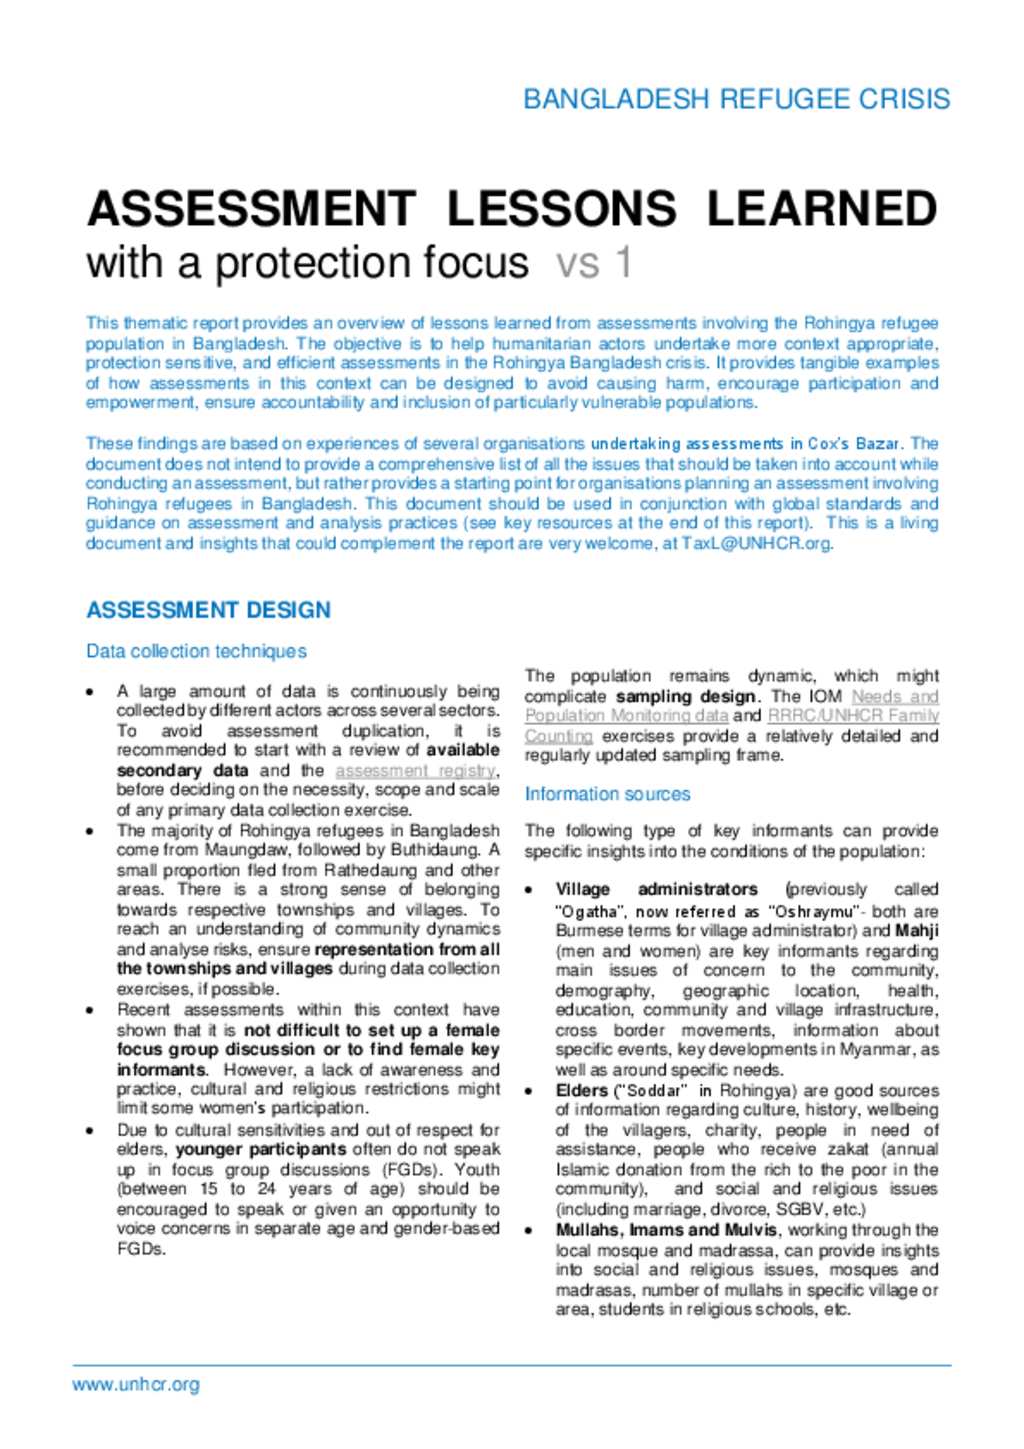 Document - Assessment Lessons Learned with a Protection Lens